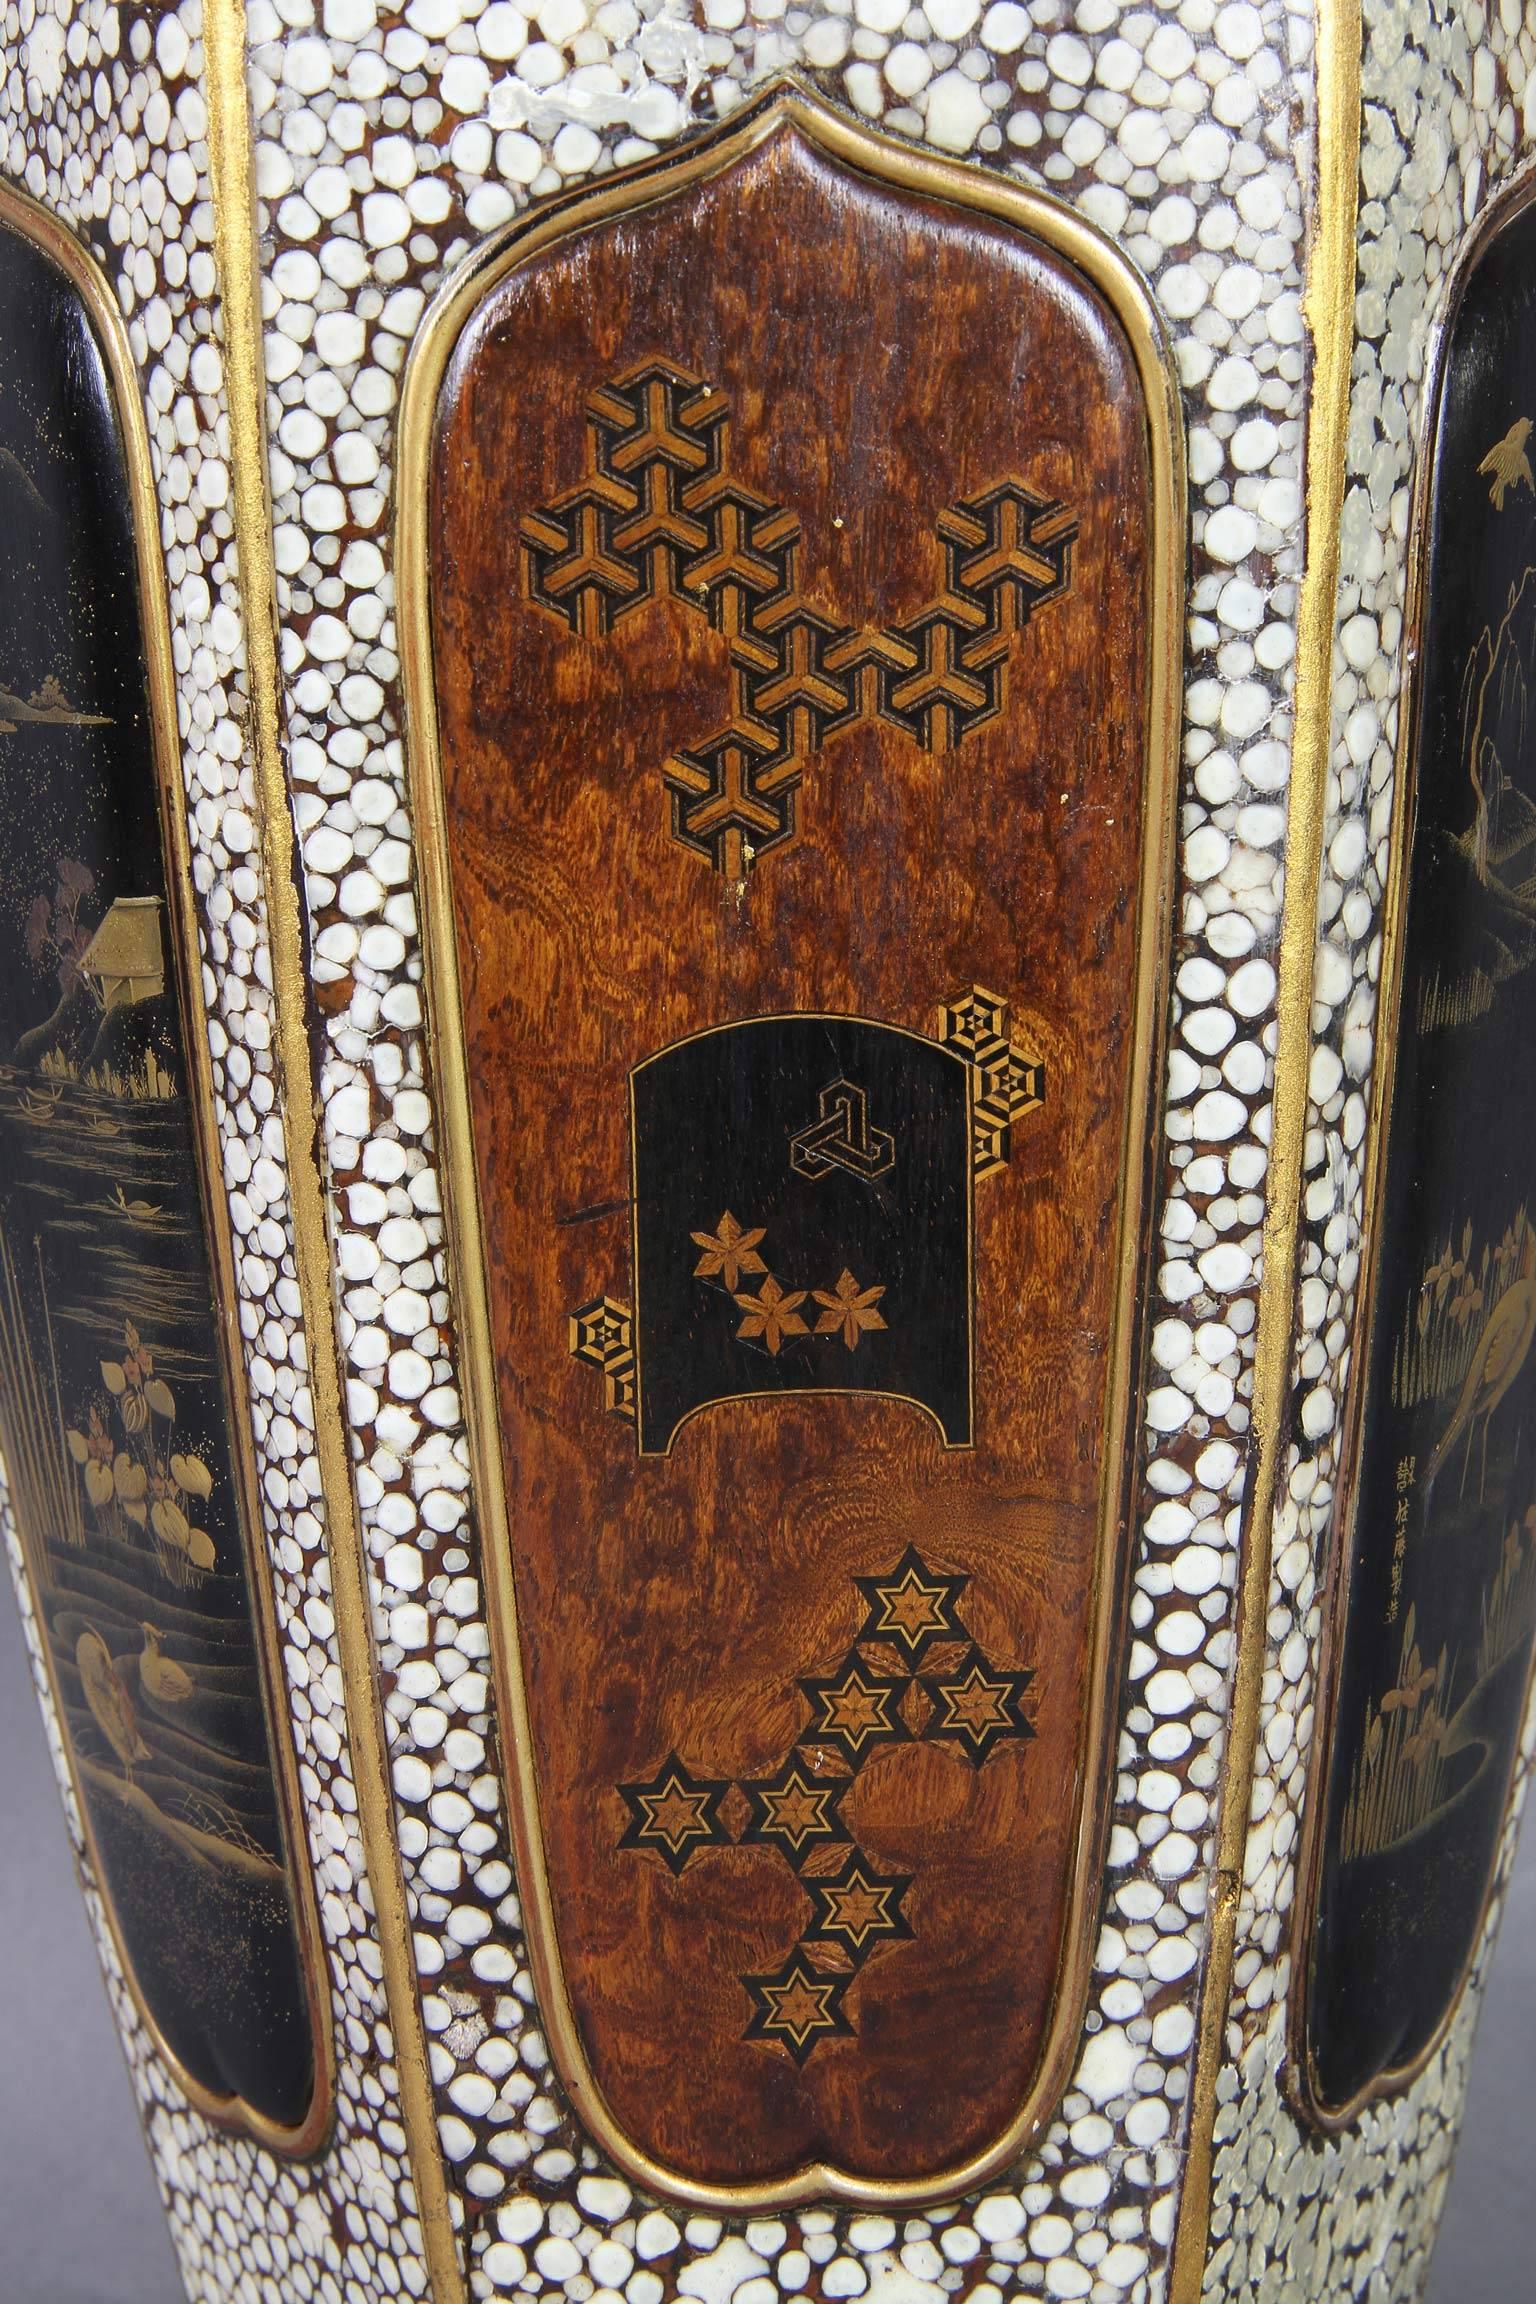 Japanese Shagreen, Lacquer and Inlaid Wood Vase 3